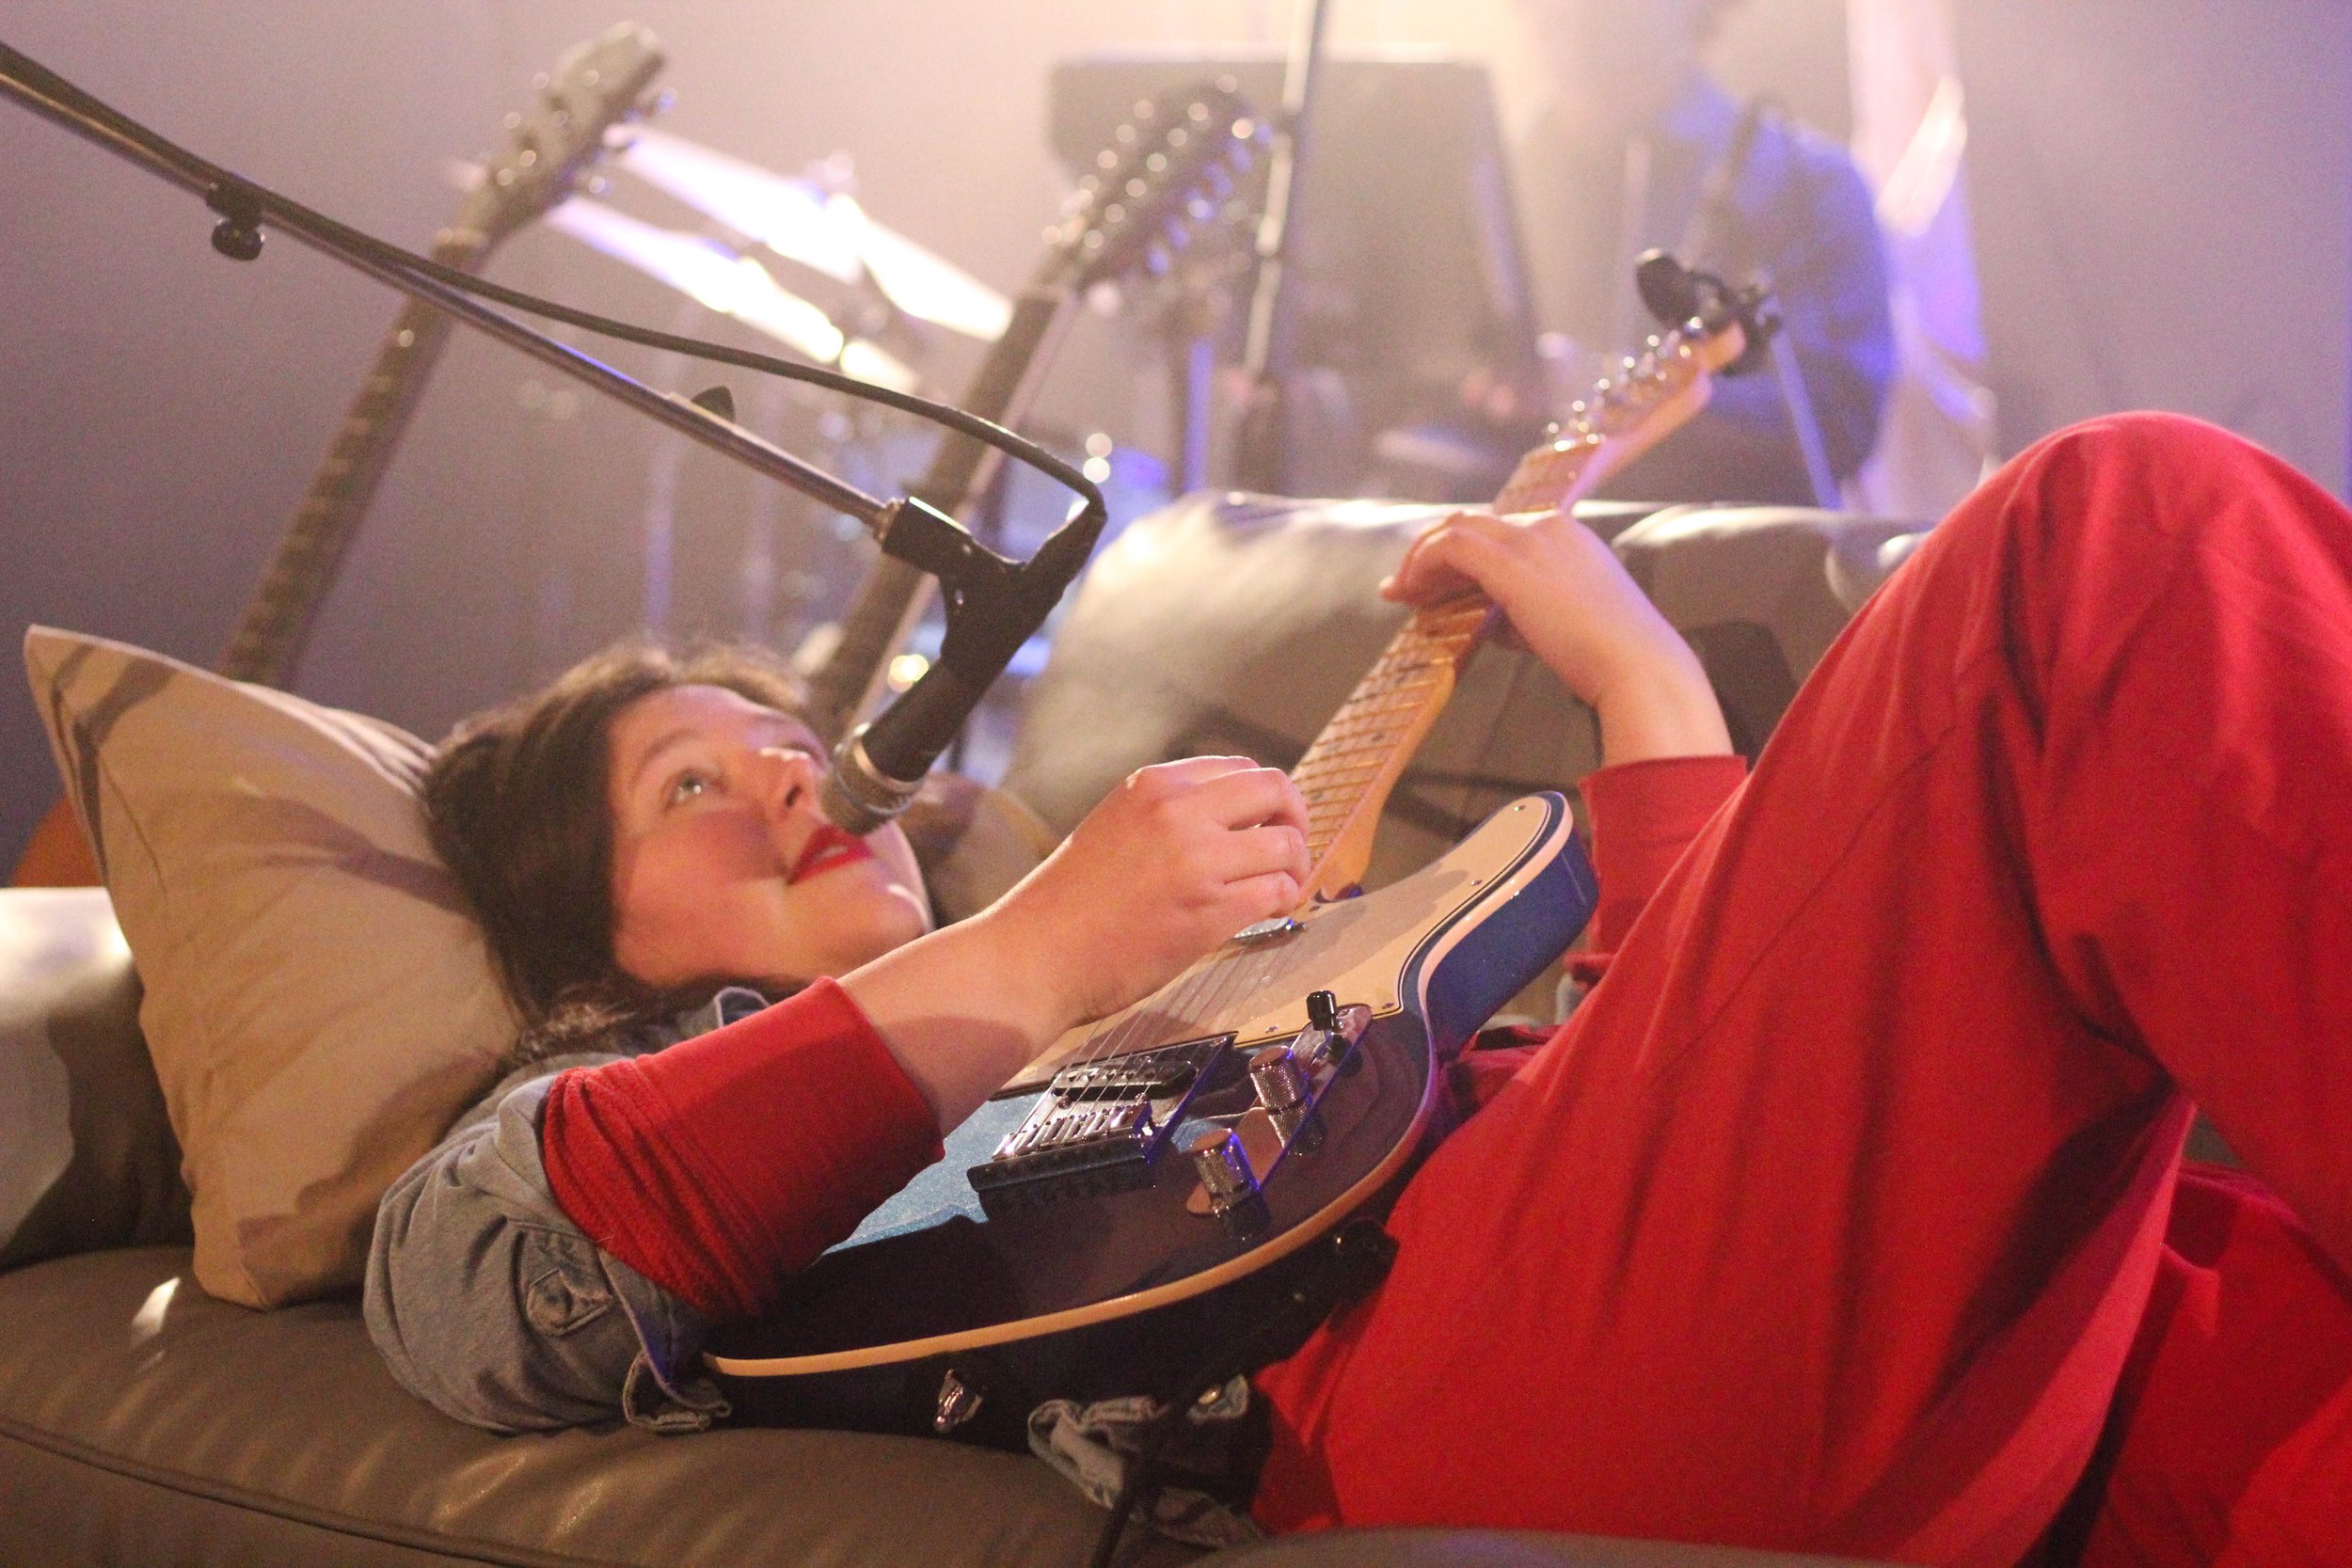 Portrait of Lucy Dacus lying on a couch, playing a blue electric guitar. She is wearing a red jumpsuit and a denim jacket. There is a microphone stand that holds a microphone over her mouth.